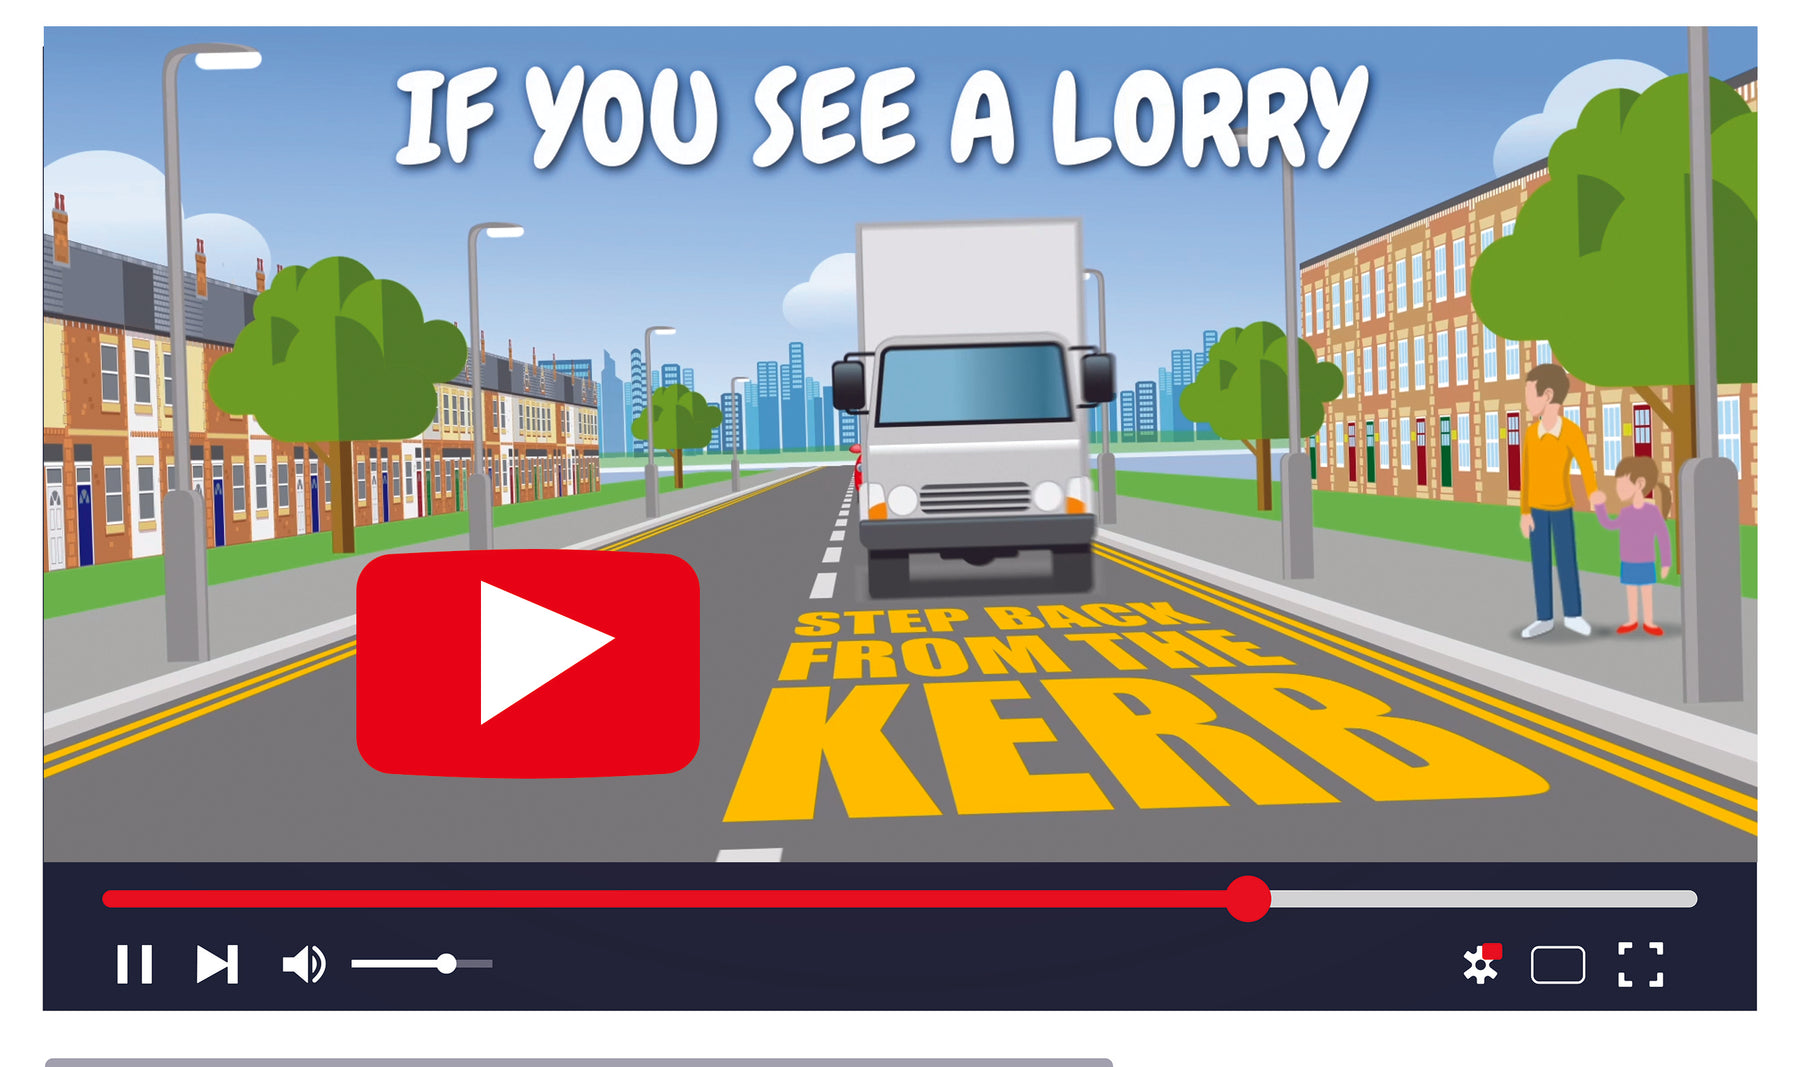 If you see a lorry